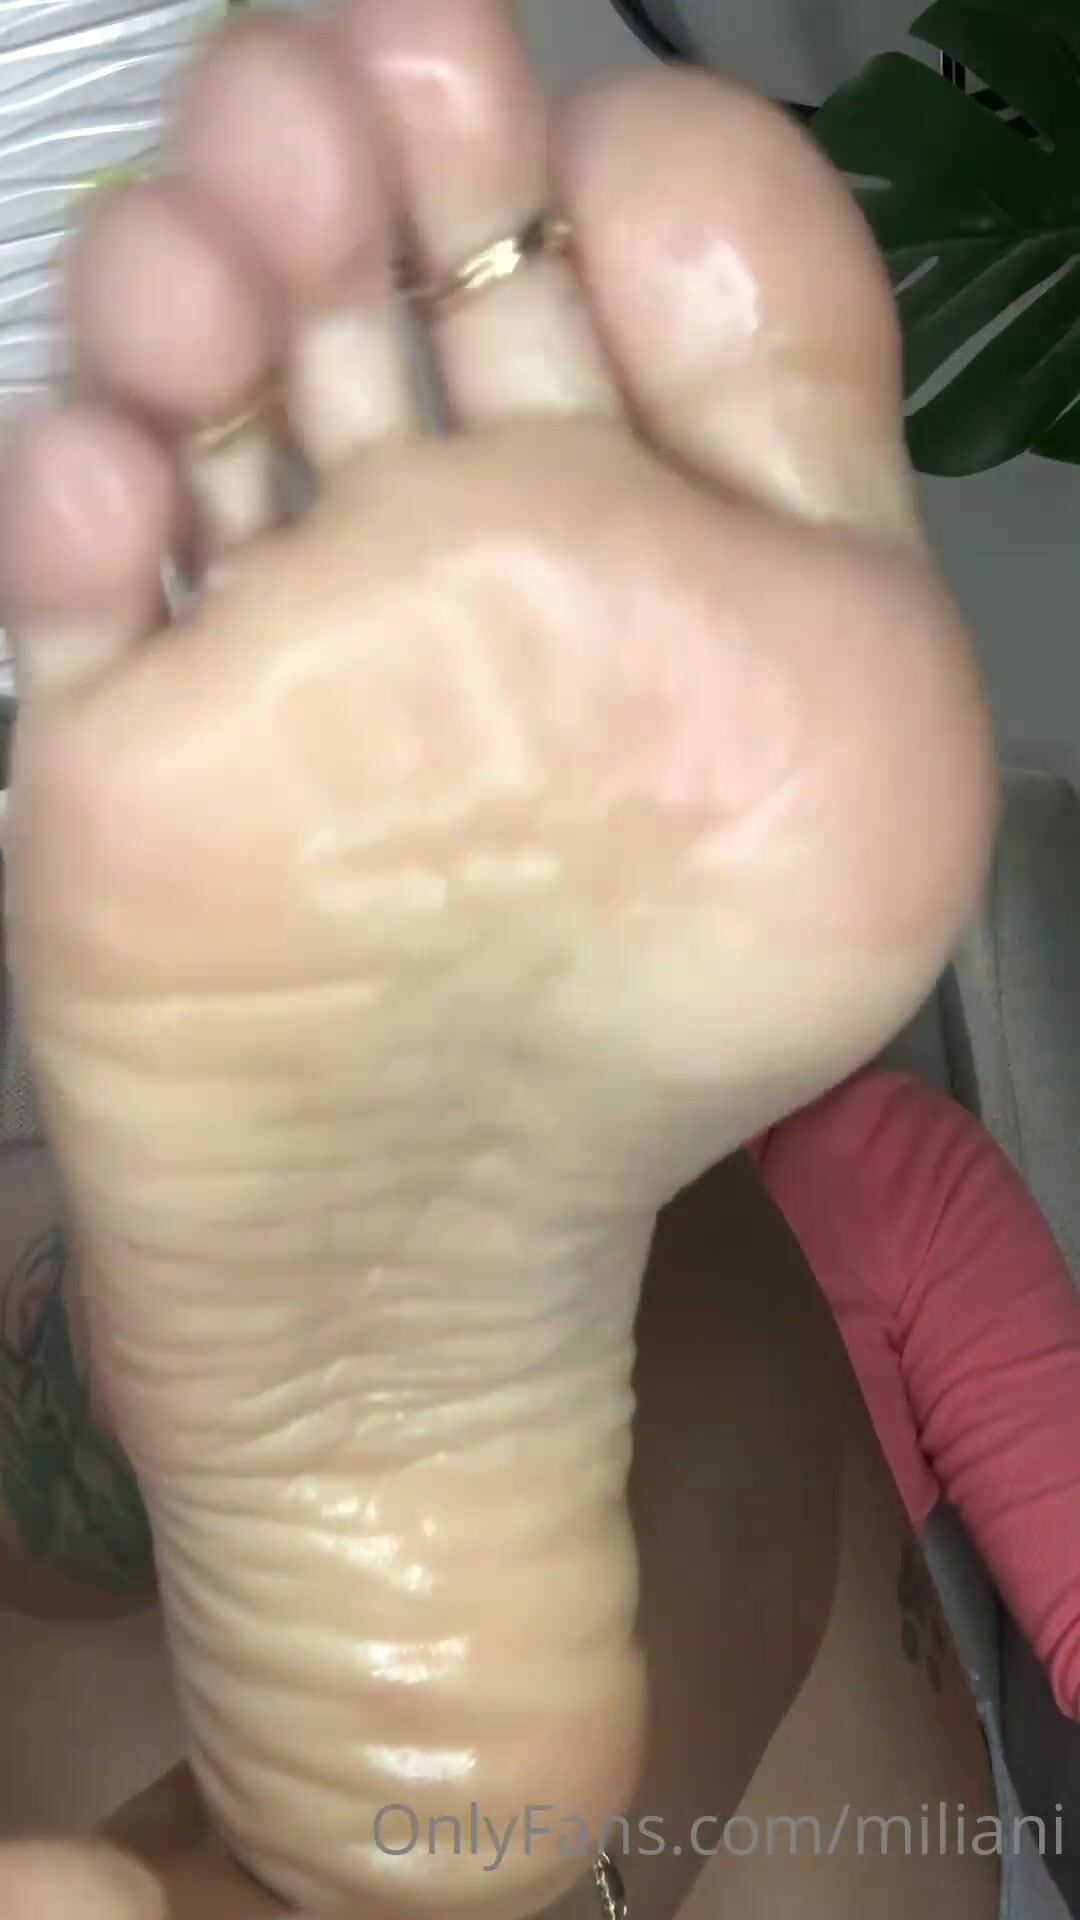 Xxxx Pily Vidio - Miliani my oily soles... waiting for you to slip up down. xxx onlyfans porn  video